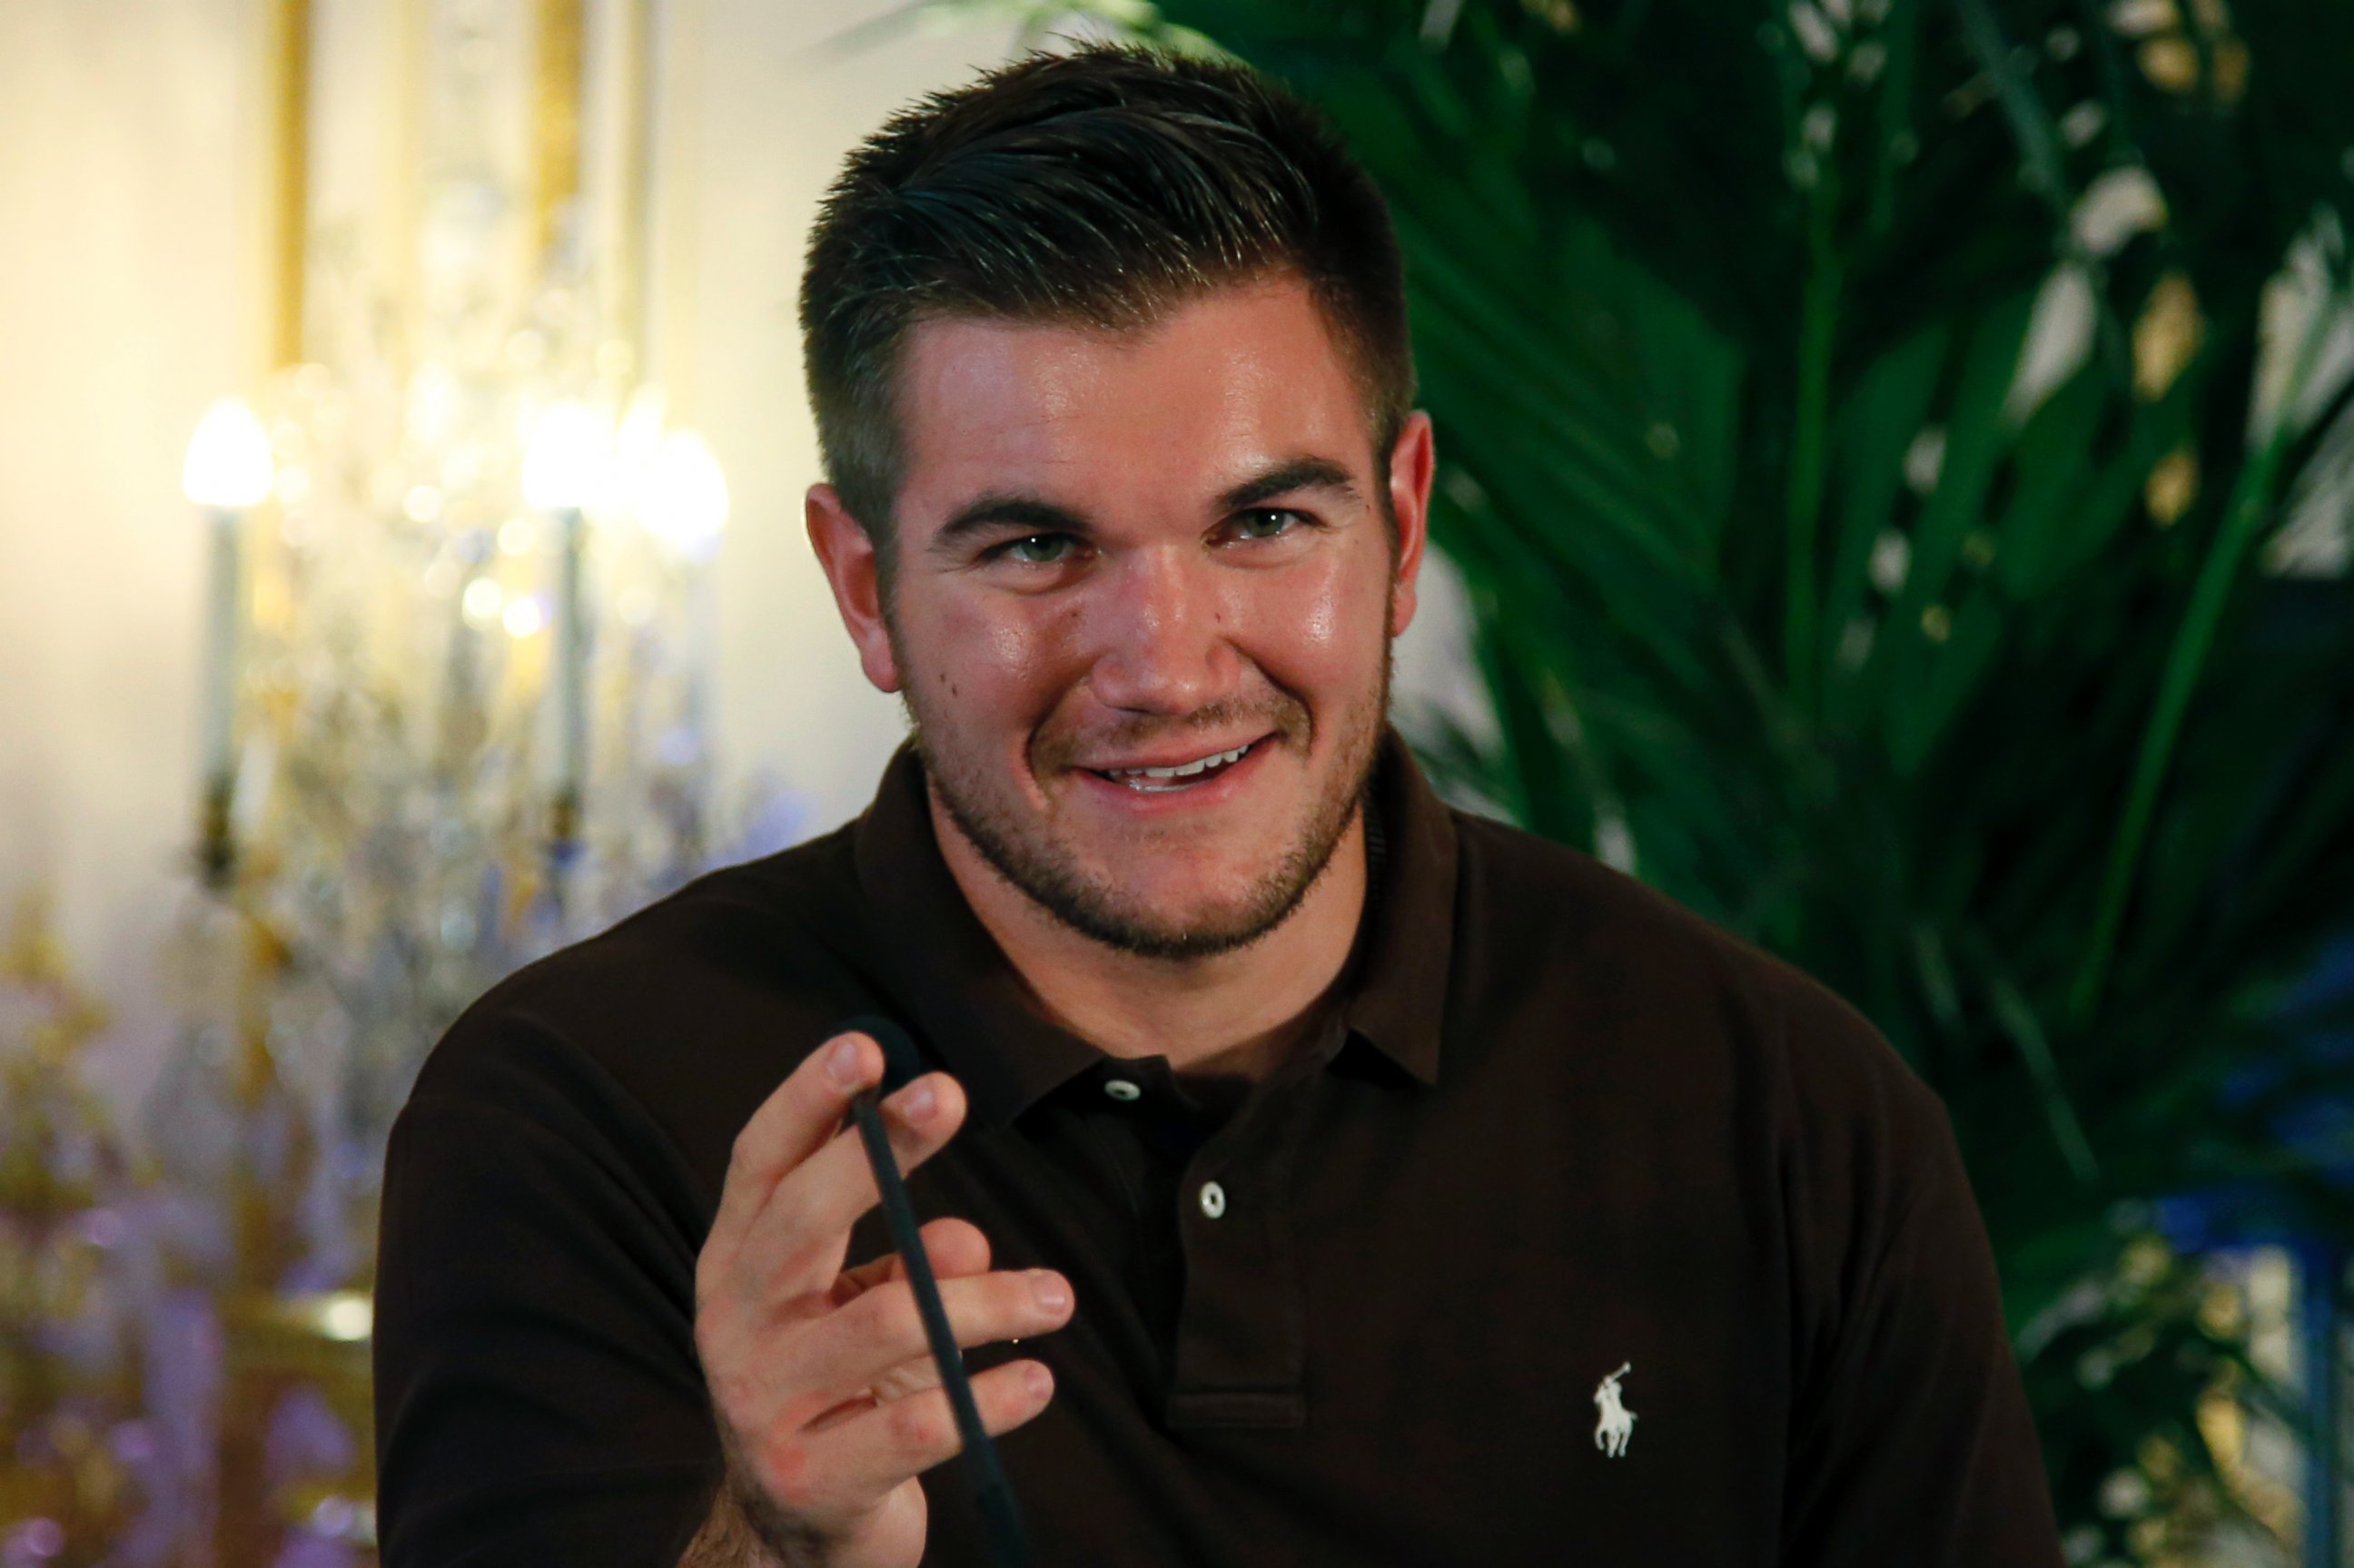 PHOTO: Alek Skarlatos attends a press conference held at the U.S. Ambassador's residence in Paris, France, Aug. 23, 2015.